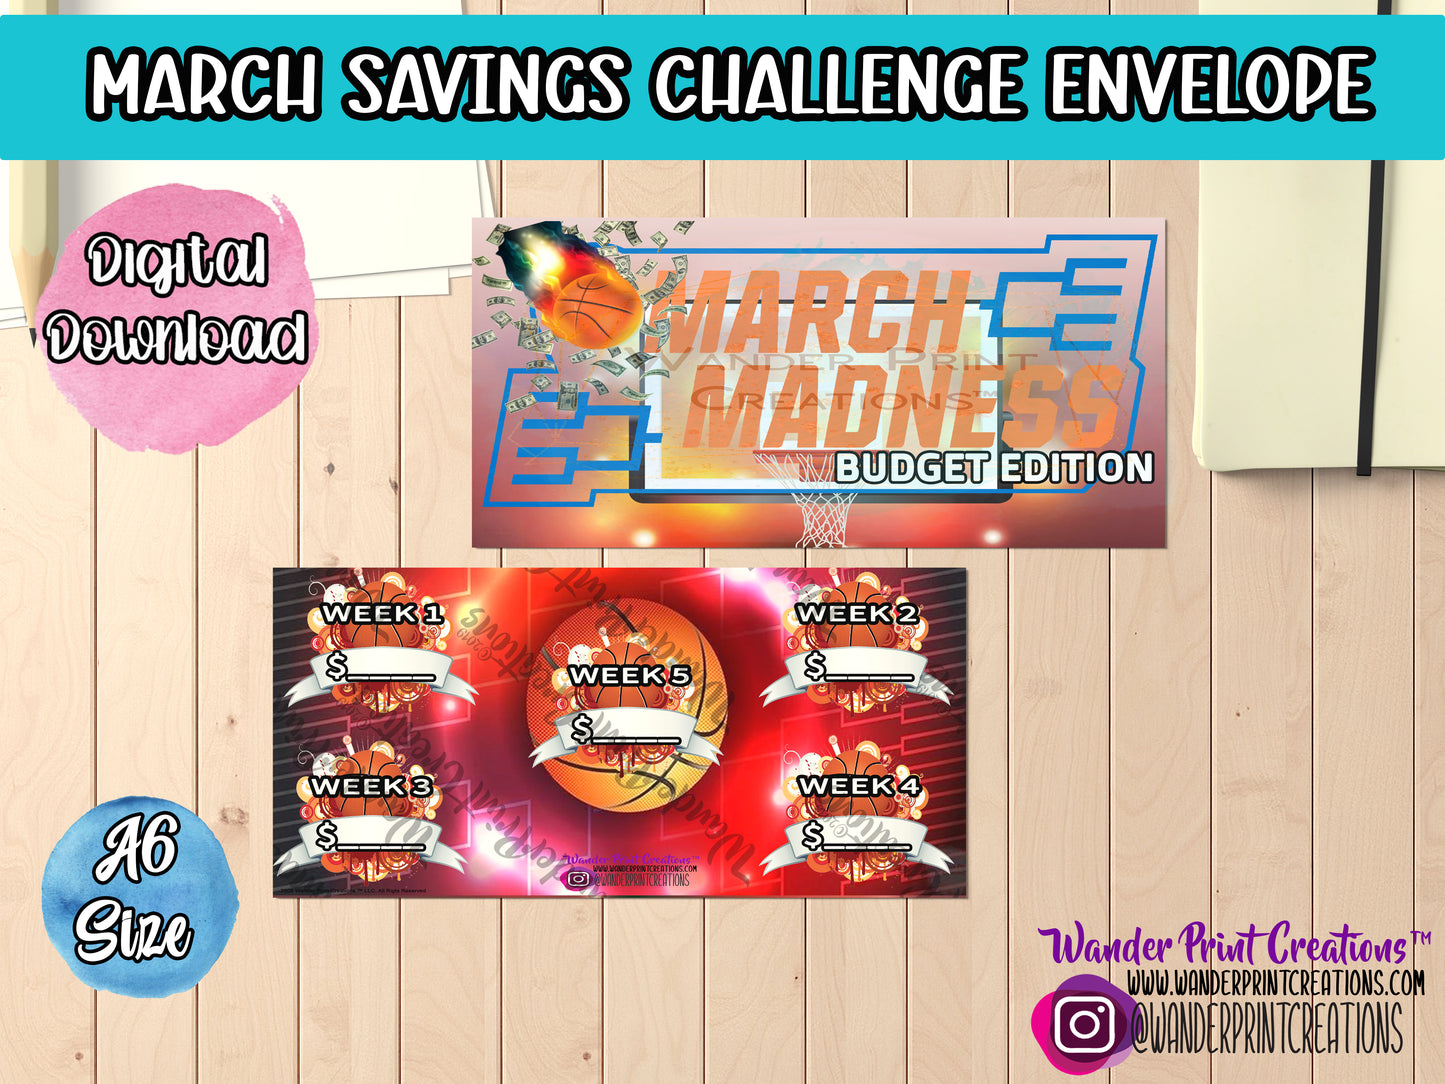 MARCH MADNESS Savings Challenge Envelope